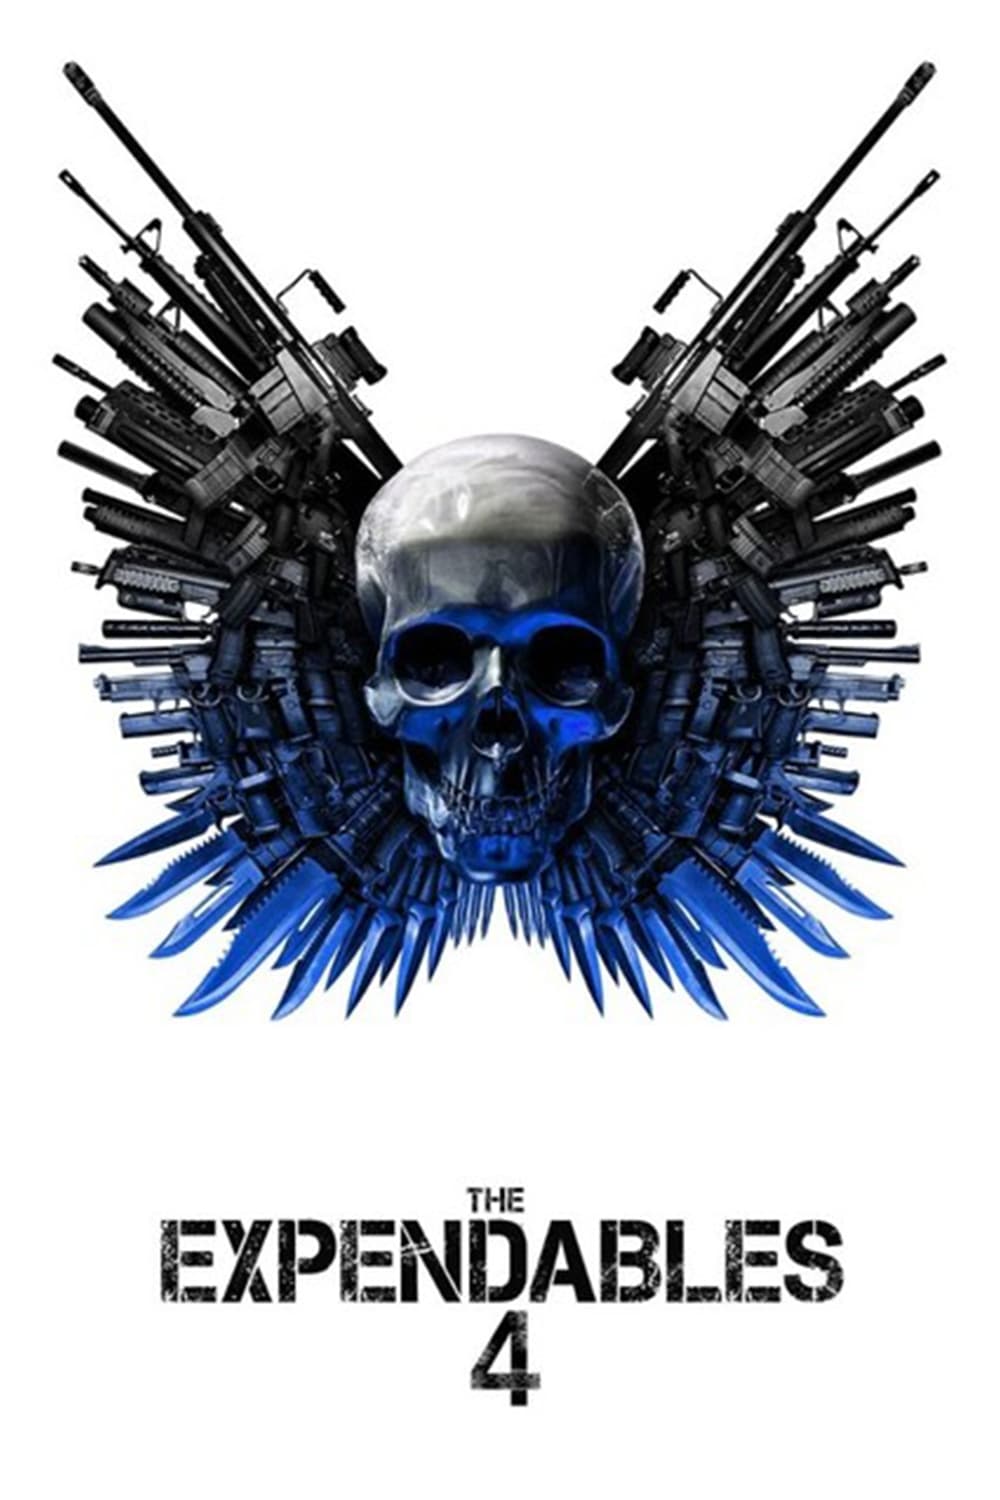 The Expendables 4 movie poster